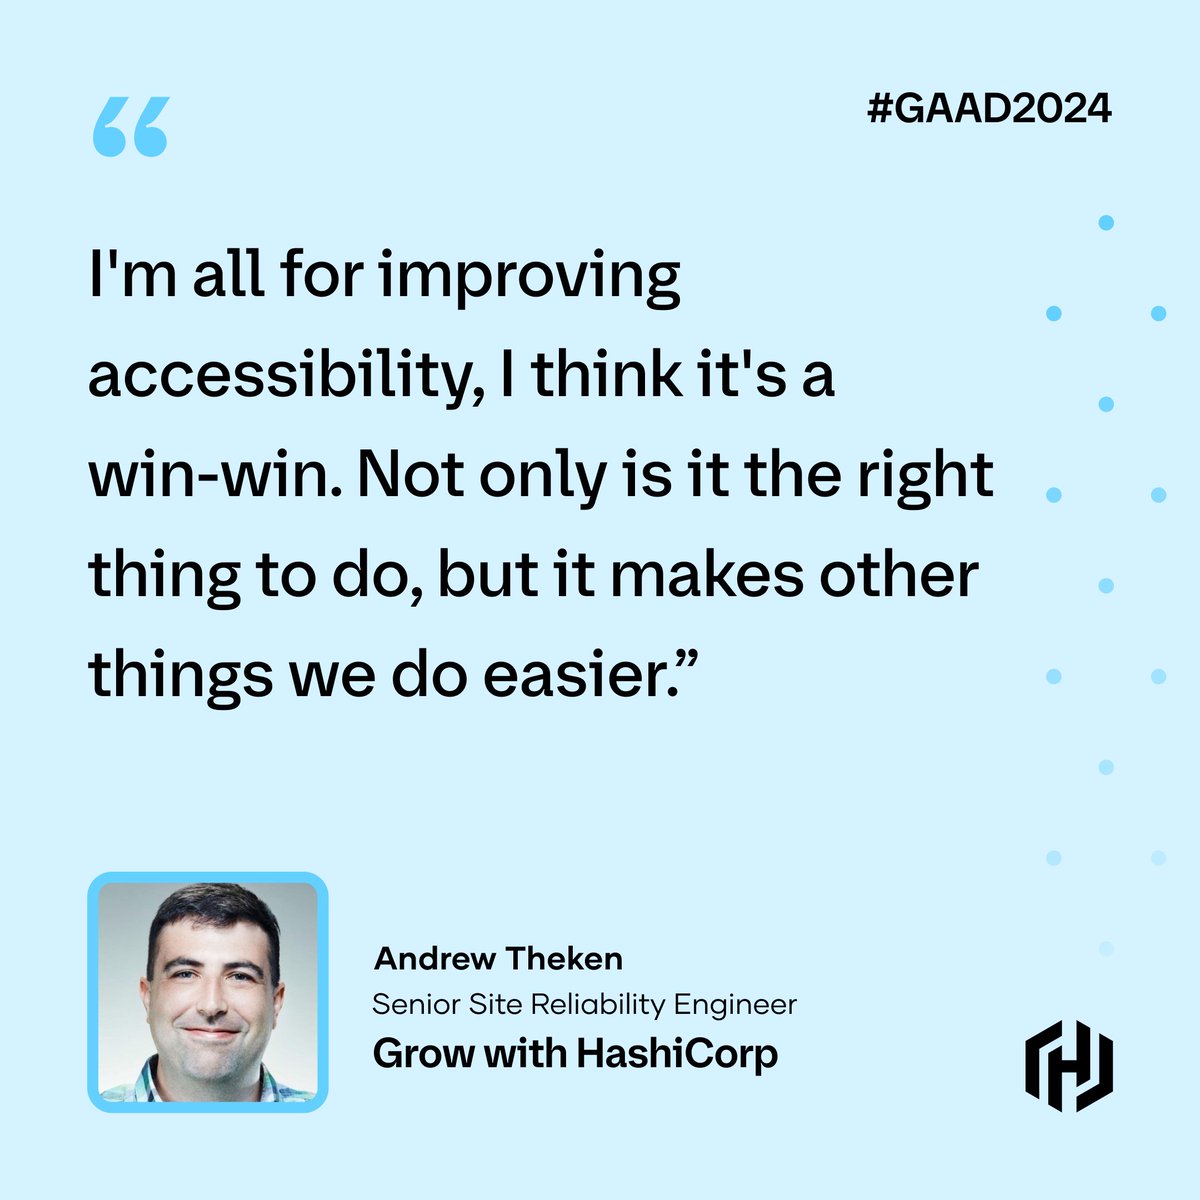 Today is Global Accessibility Awareness Day, so we asked some of the HashiCorp team for their thoughts on efforts to make our products more accessible and compliant with global accessibility regulations. Here’s what they said. 👇 #GAAD2024